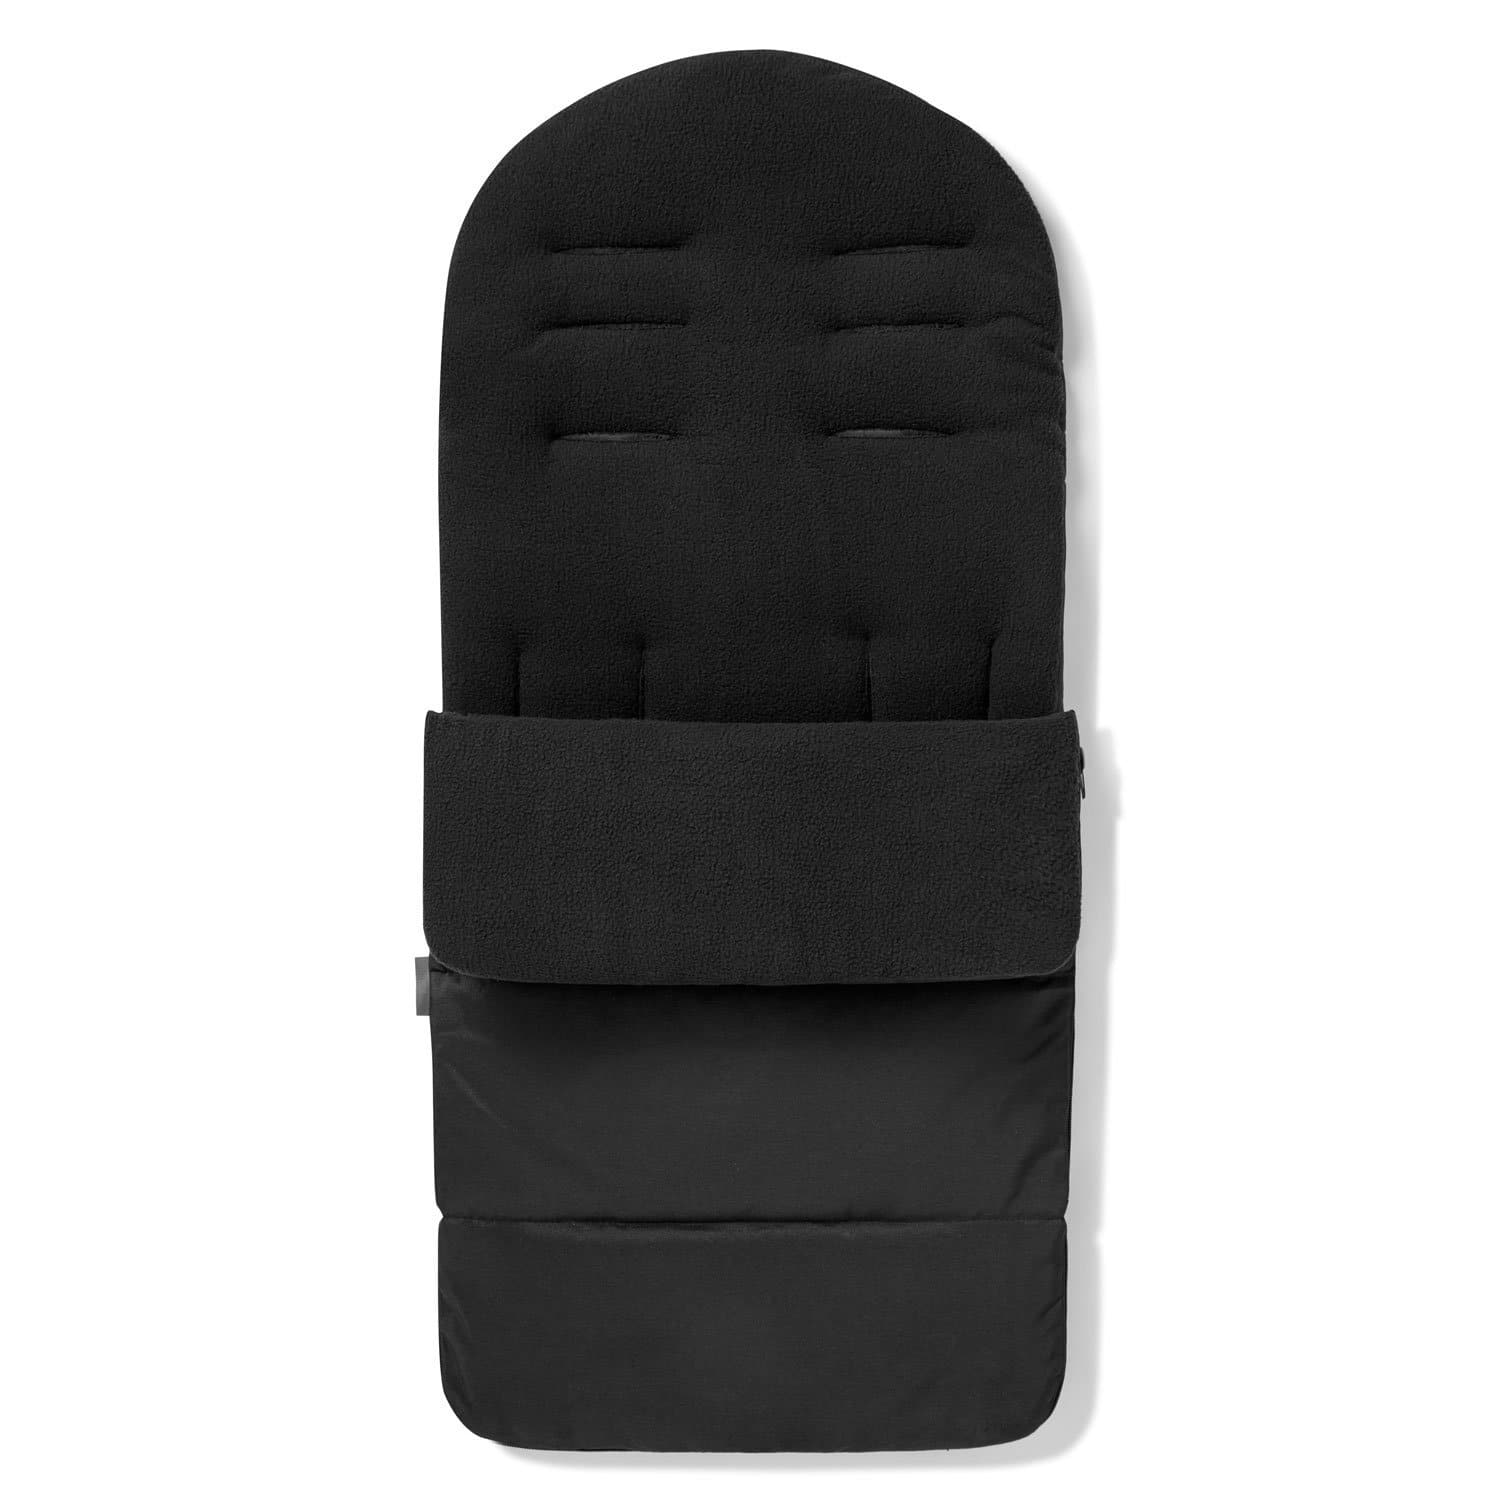 Premium Footmuff / Cosy Toes Compatible with Concord - Black Jack / Fits All Models | For Your Little One